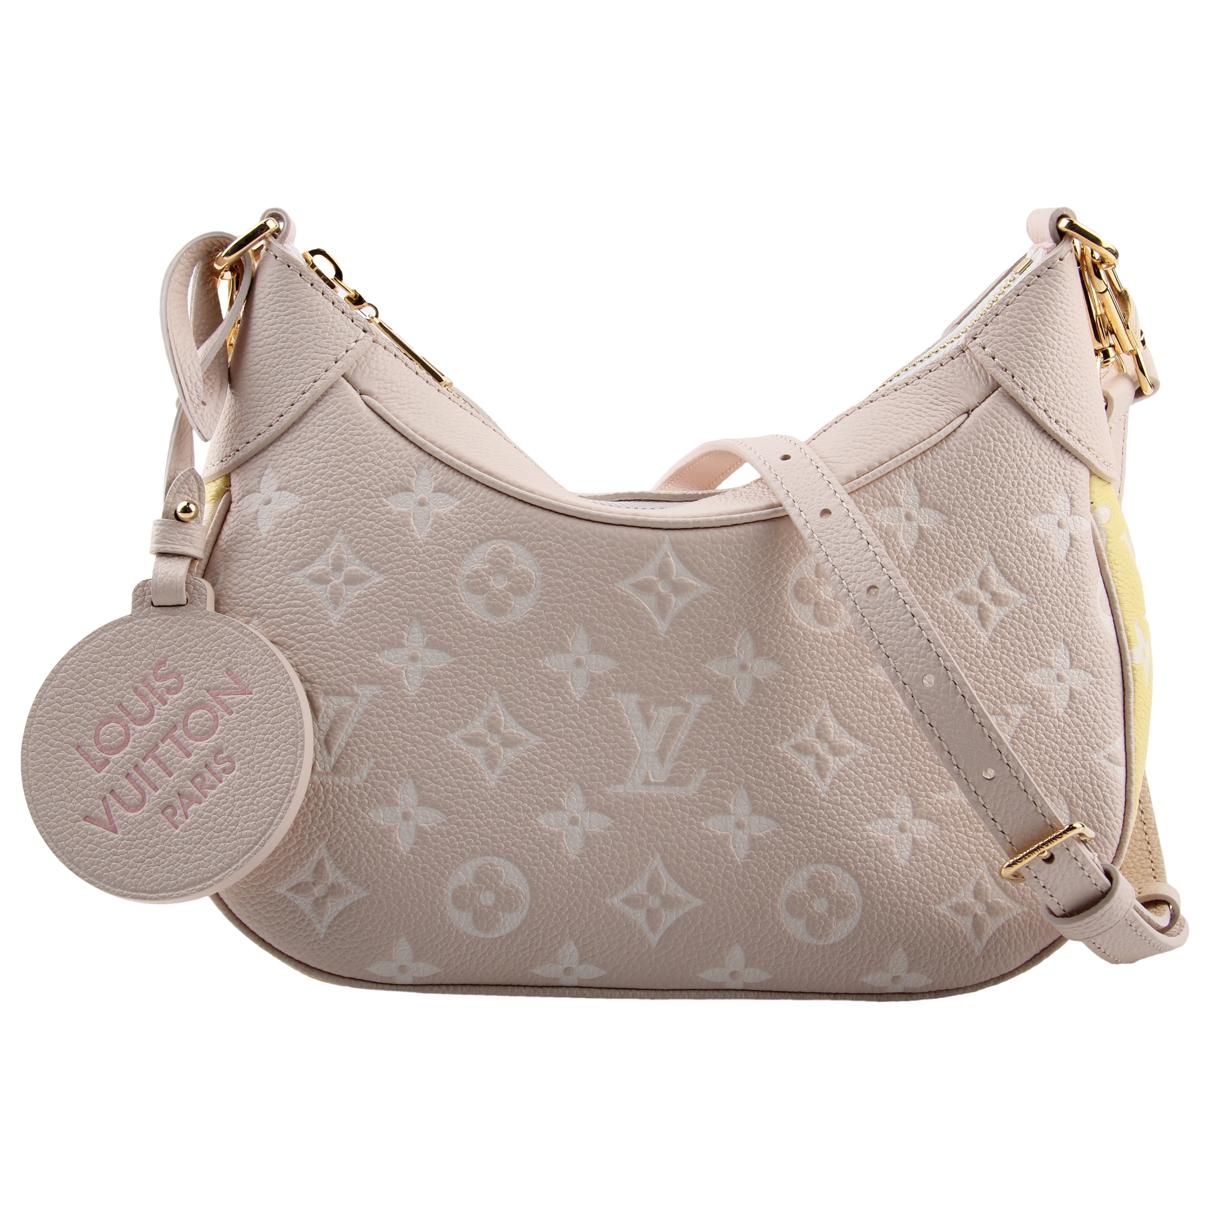 Louis Vuitton - Authenticated Bagatelle Handbag - Leather Pink for Women, Very Good Condition